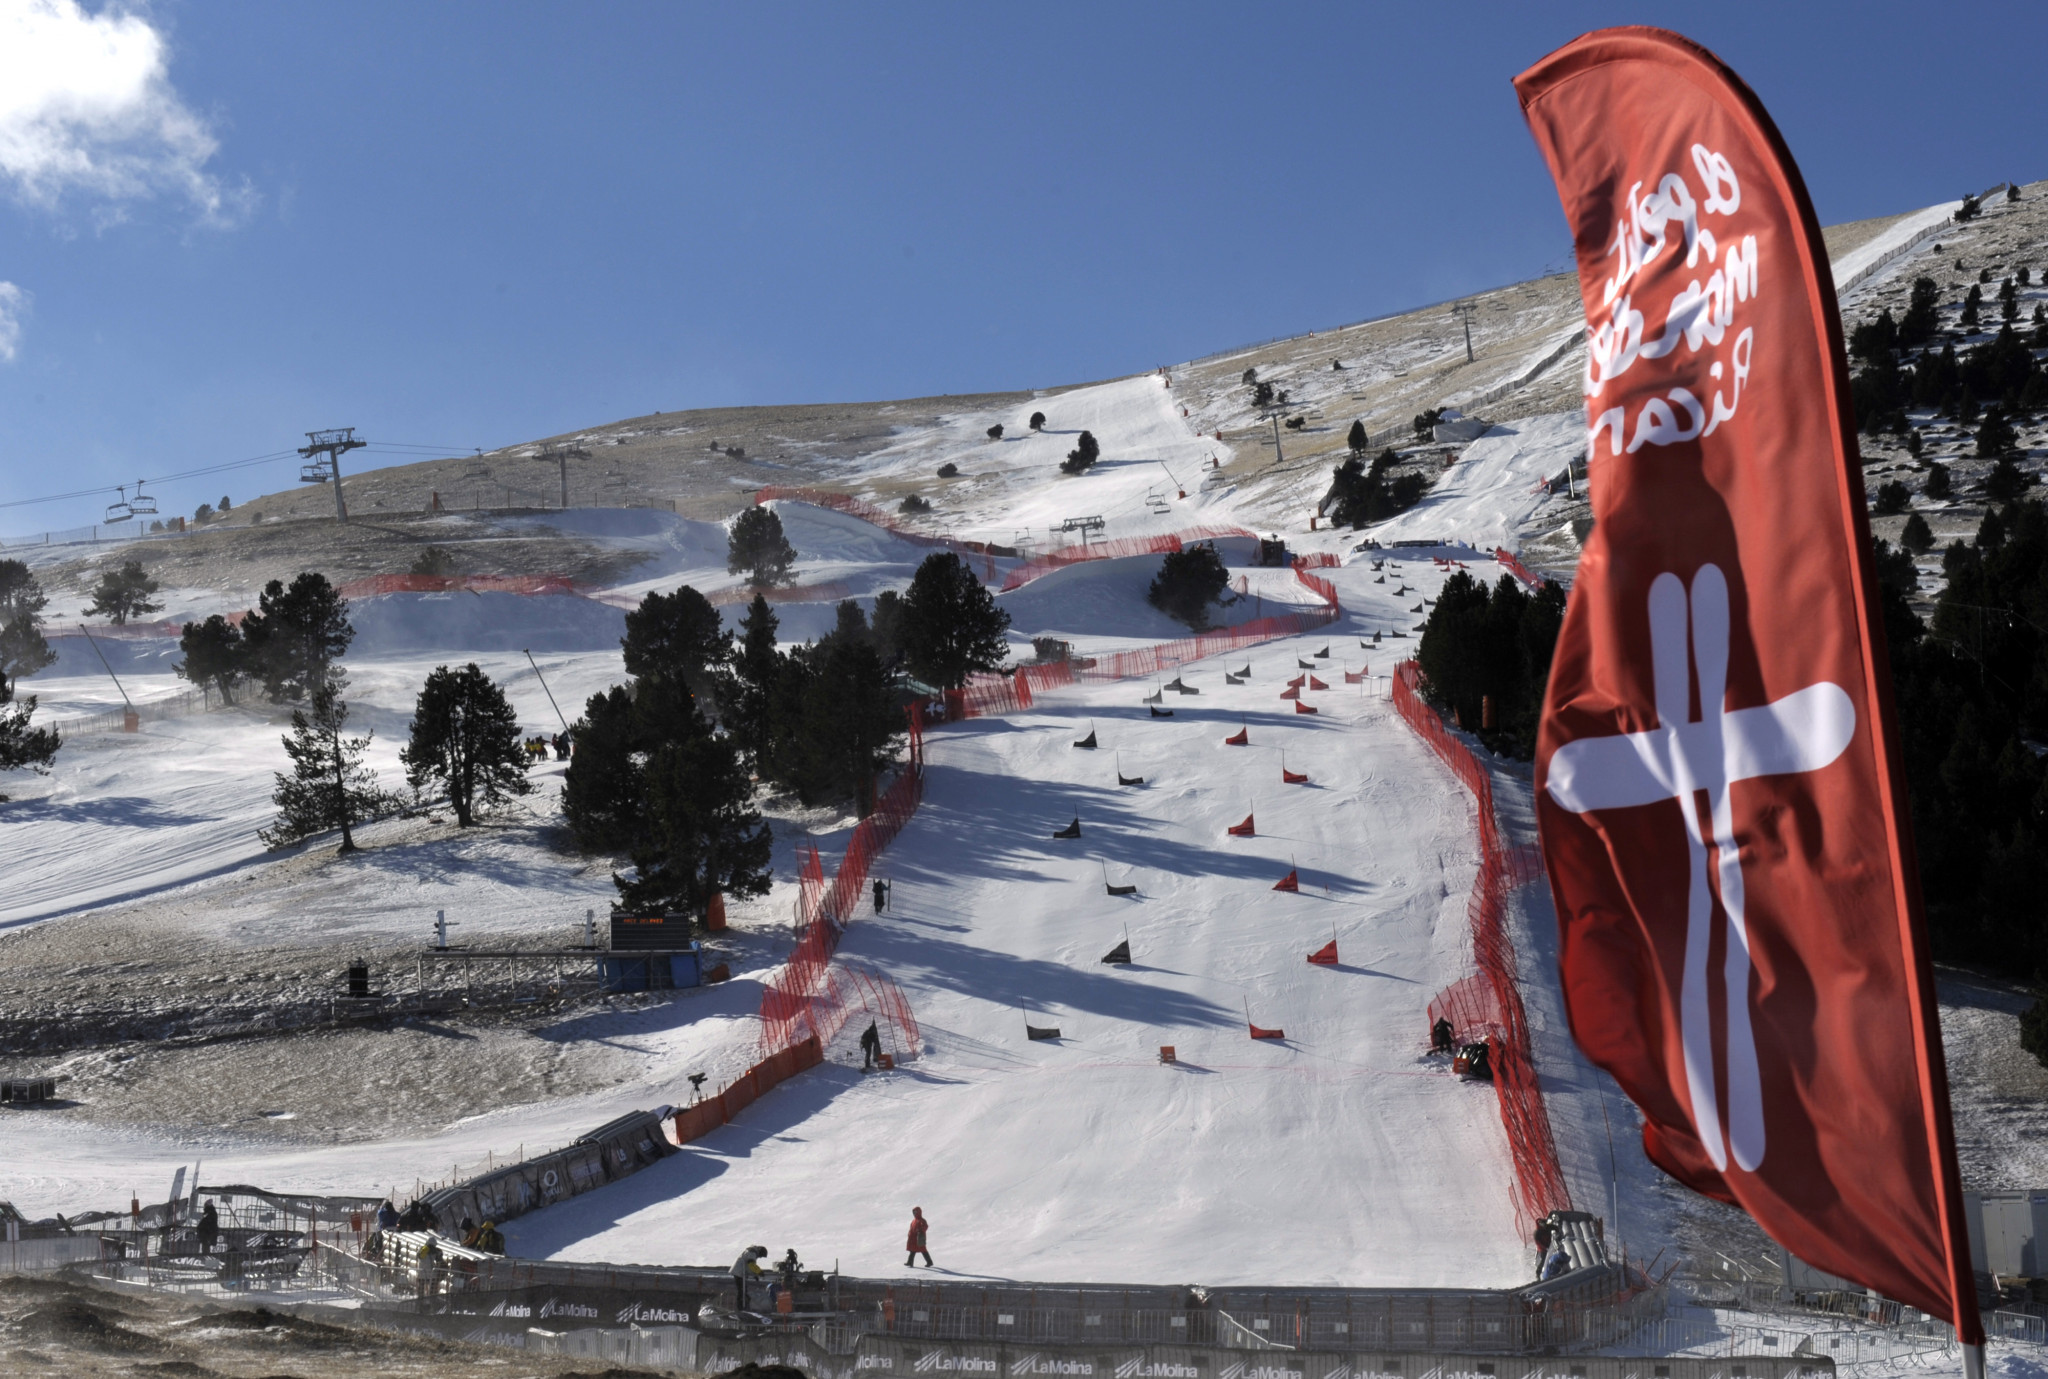 La Molina in Spain was supposed to hold the event this month, but it has been rescheduled from March 9 to 19 ©Getty Images